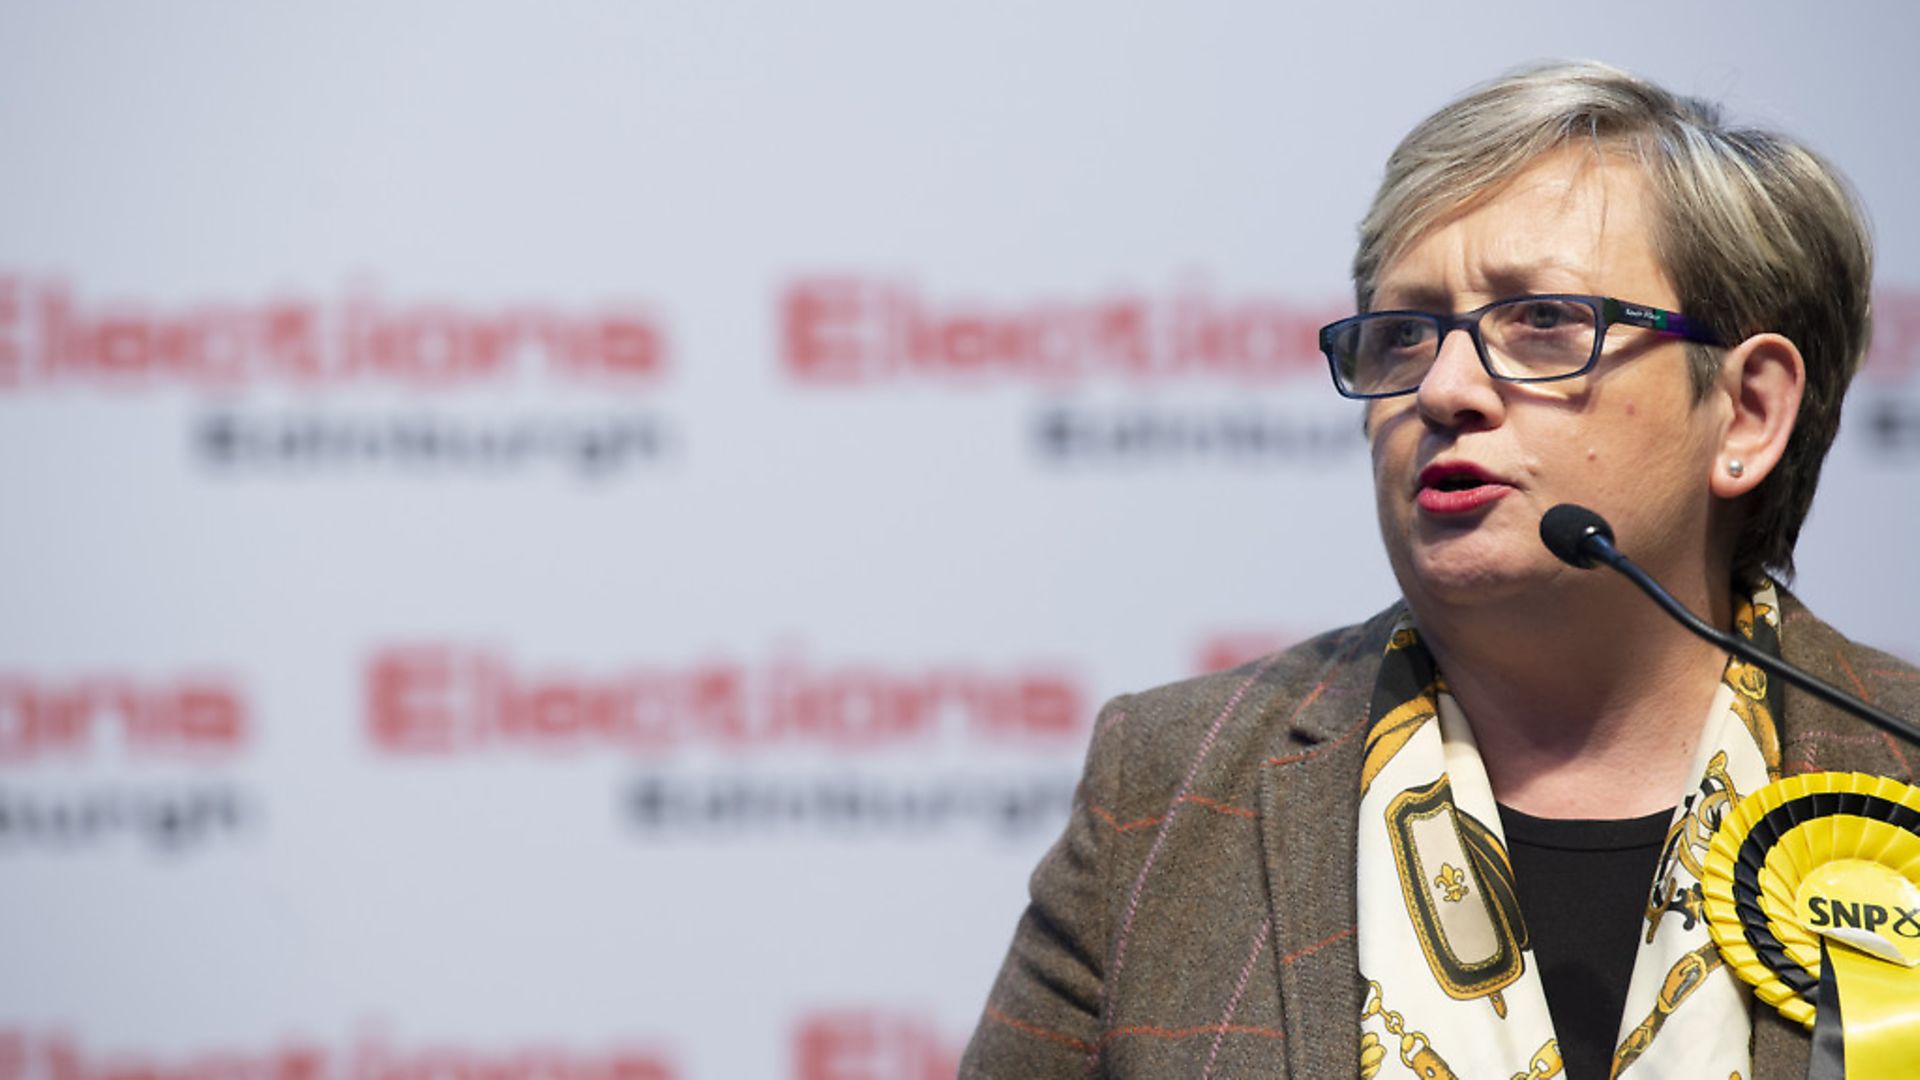 SNP's Joanna Cherry retains her seat in Edinbrgh South West and launched an attack on Boris Johnson. Picture: Lesley Martin/PA Wire - Credit: Lesley Martin/PA Wire